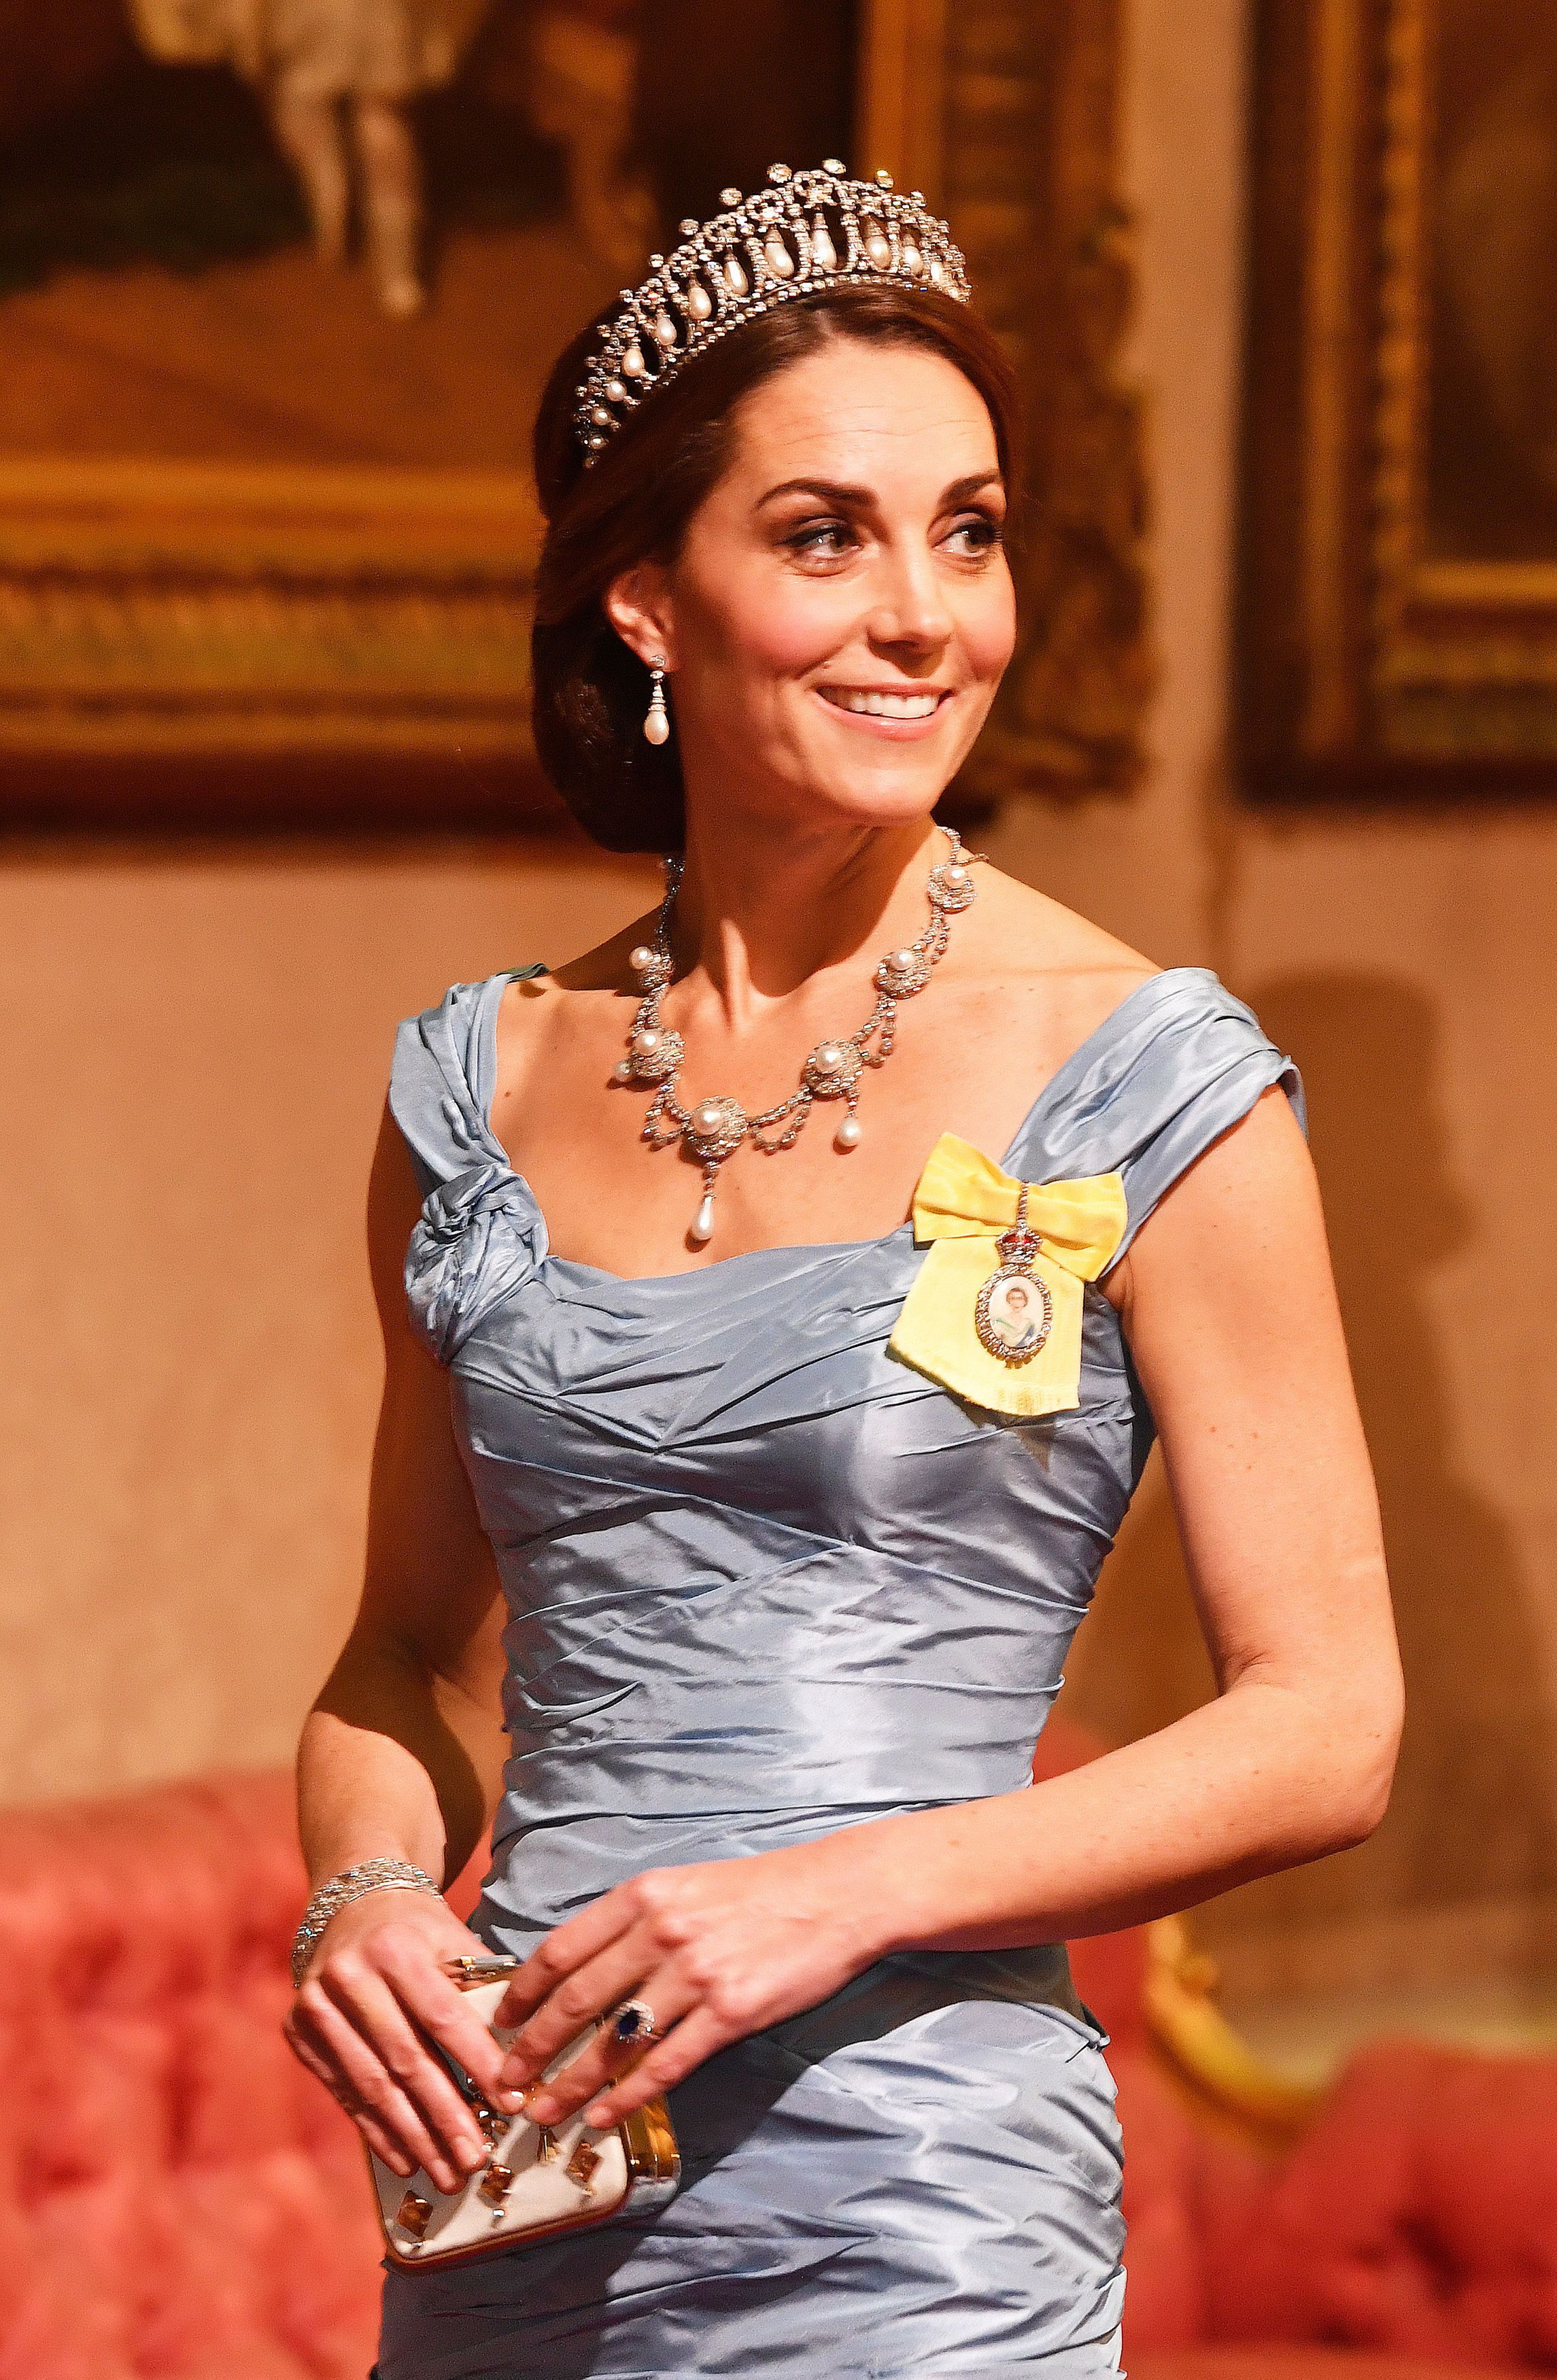 catherine-duchess-of-cambridge-during-a-state-banquet-at-news-photo-1052839874-1540391744.jpg